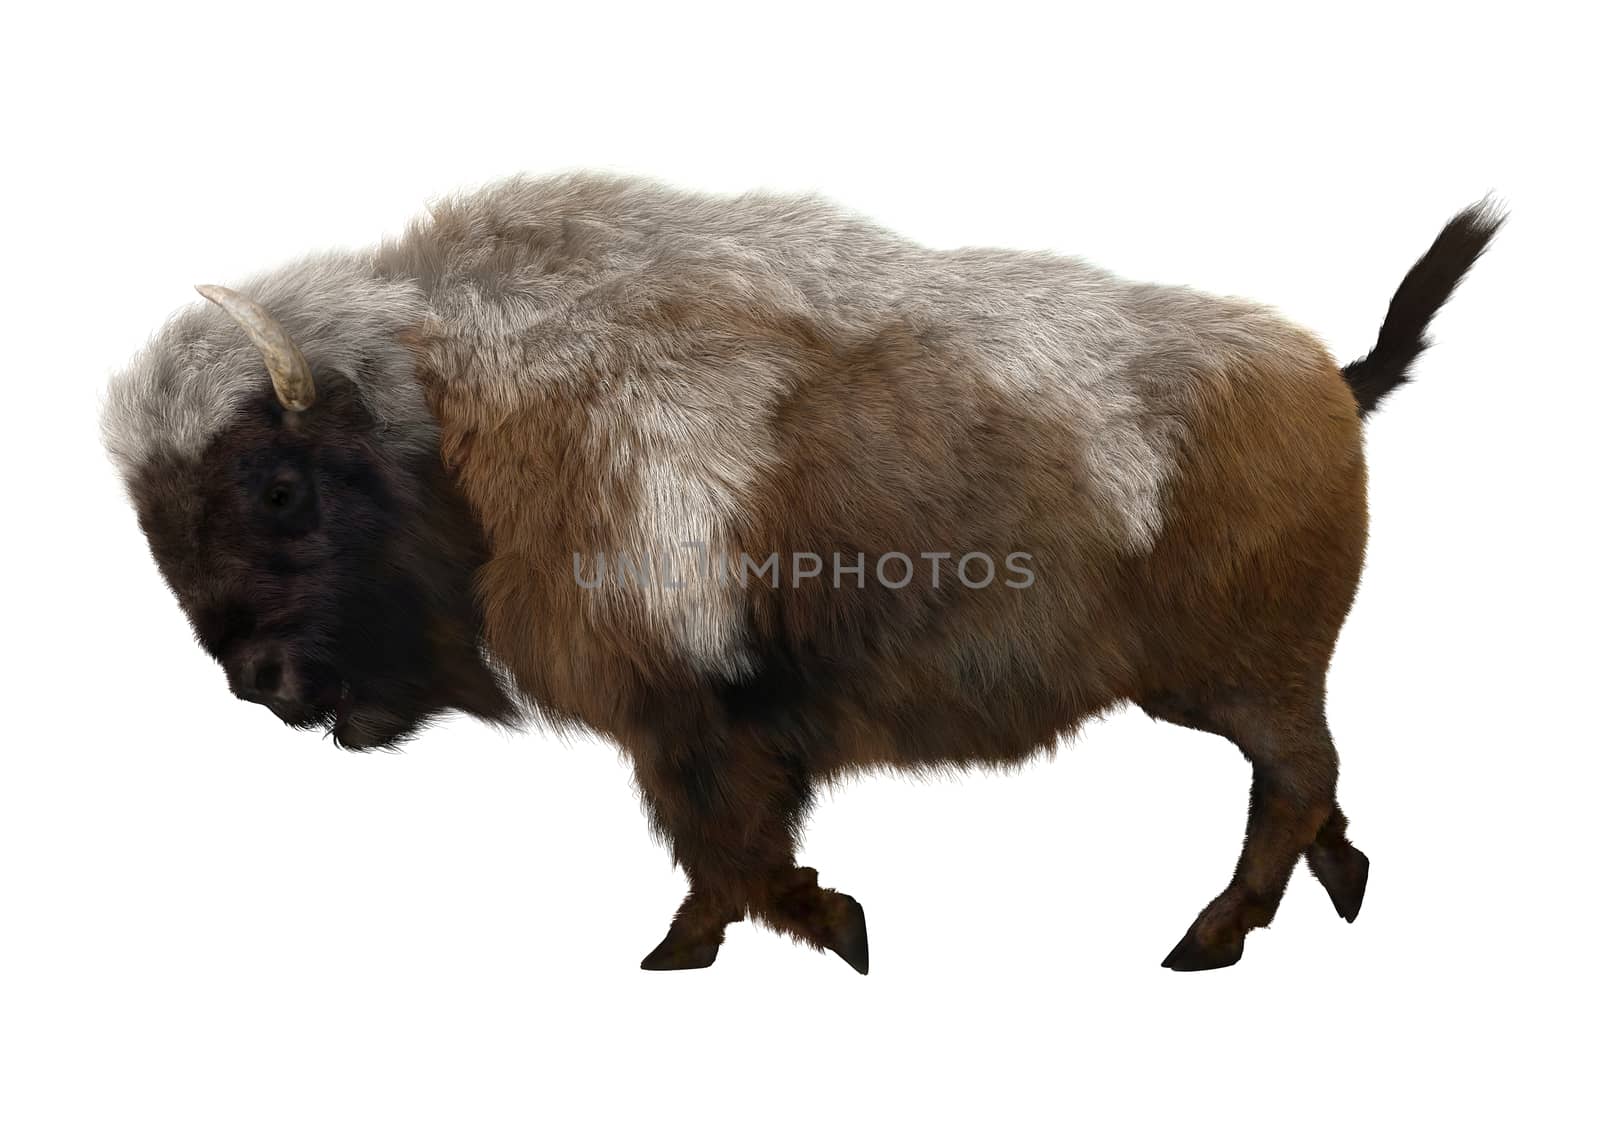 3D digital render of an American bison walking isolated on white background